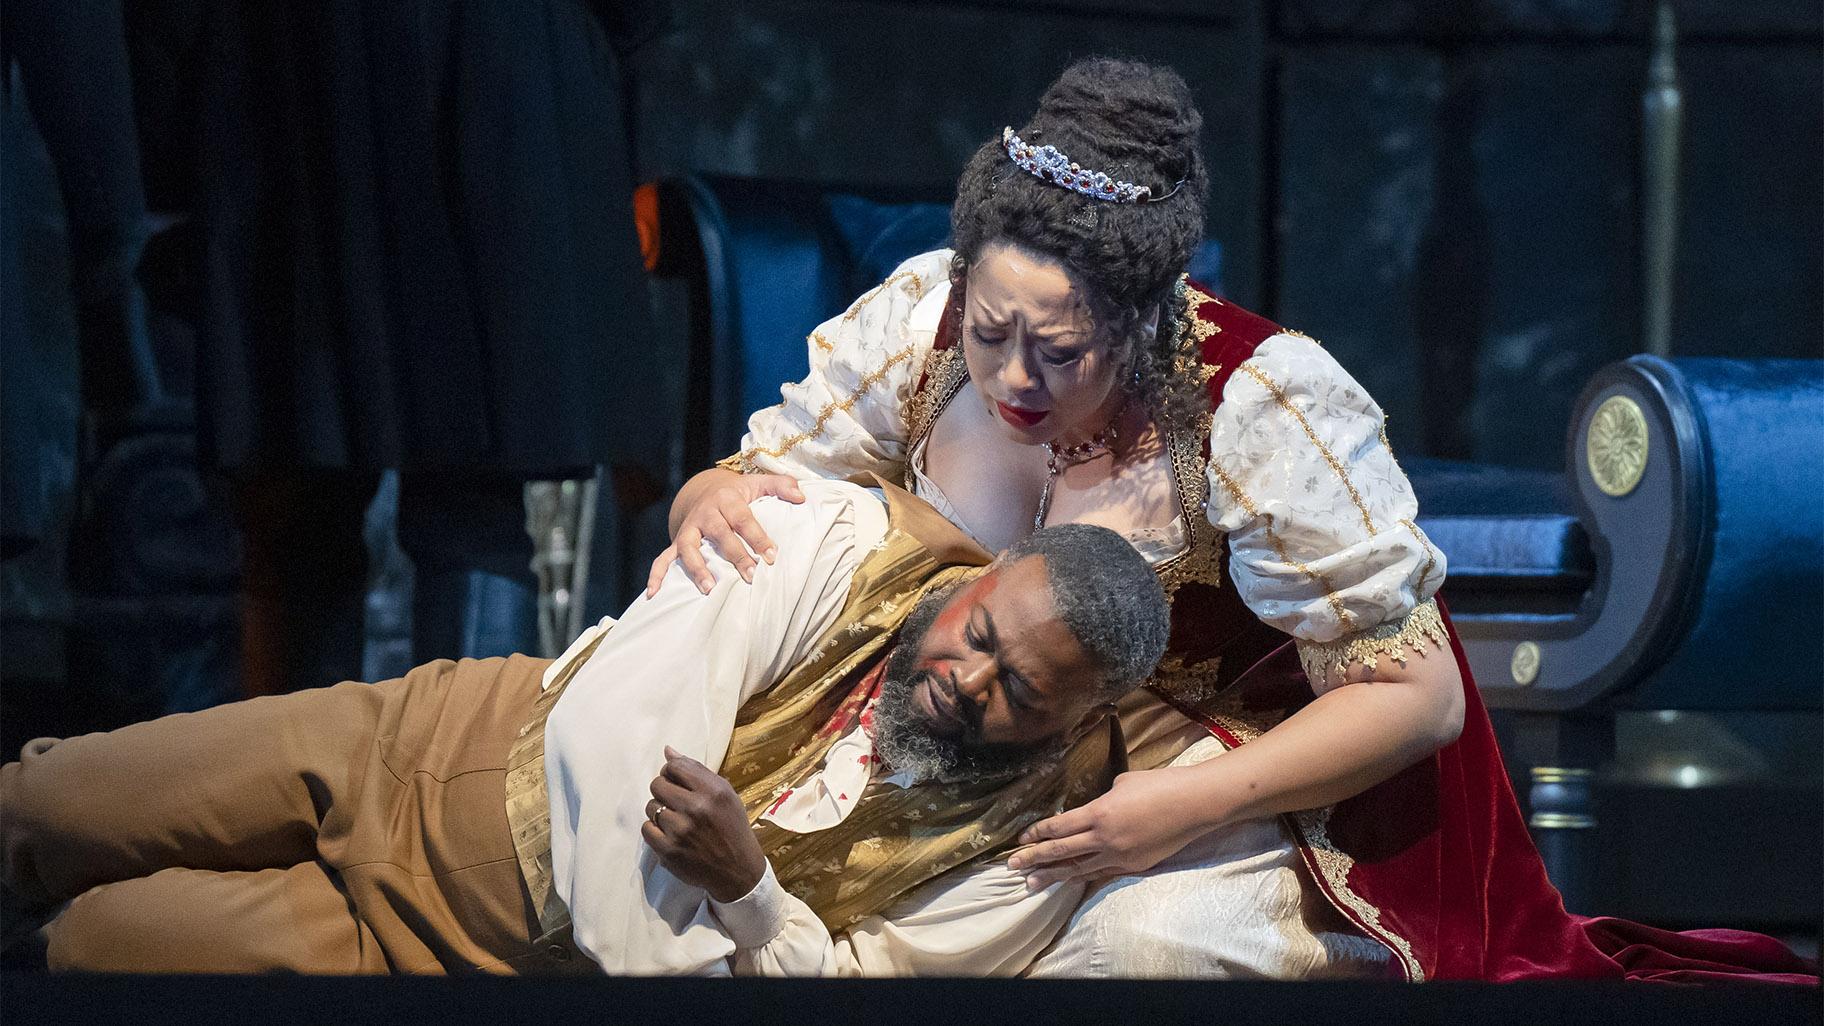 Russell Thomas as Mario Cavaradossi and Michelle Bradley as Floria Tosca (Credit: Todd Rosenberg)